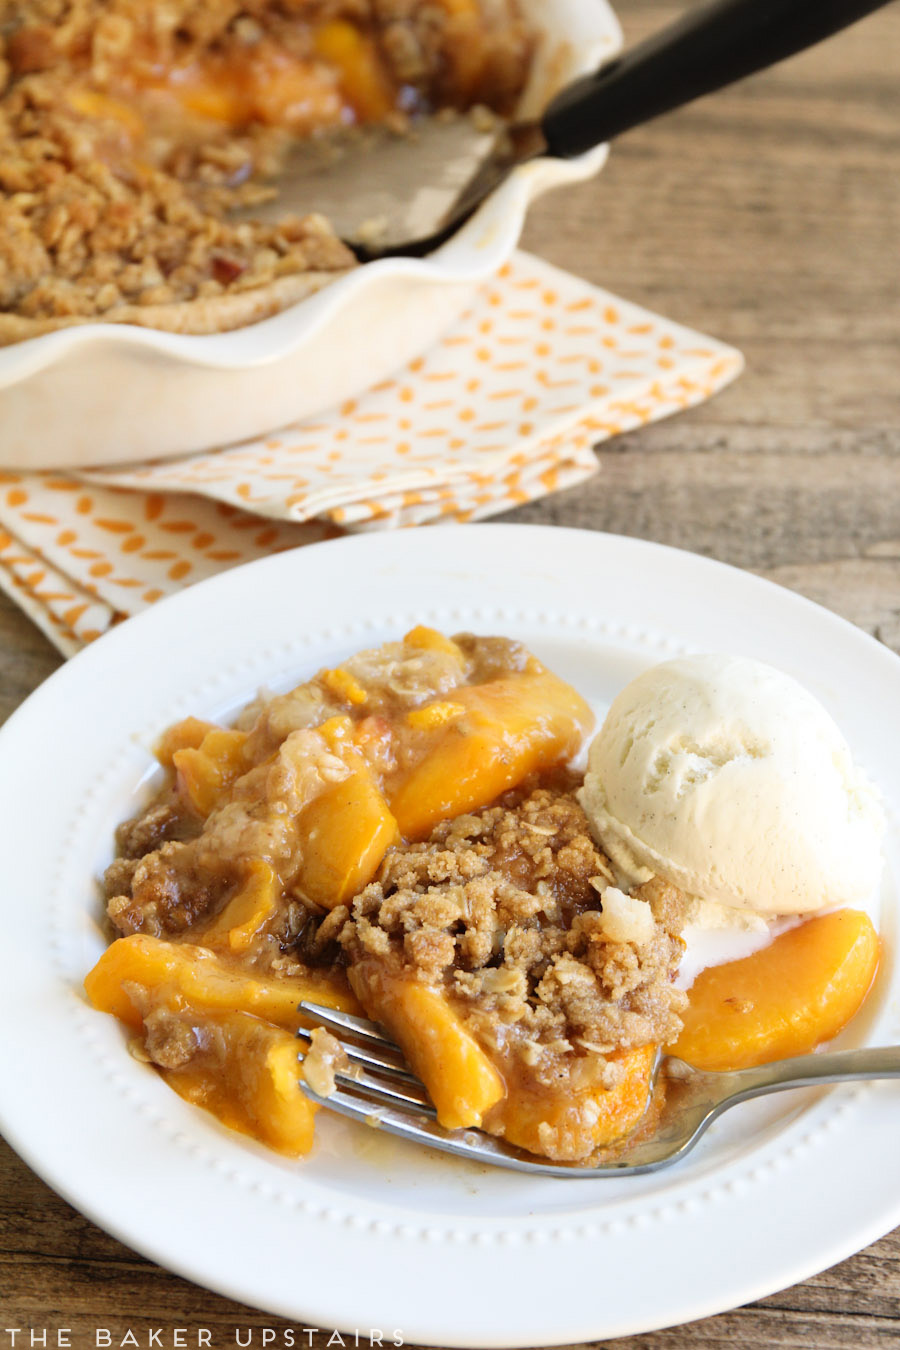 Peach crisp pie - a delicious pie with sweet juicy peaches and a buttery, cinnamony, crunchy crisp topping!